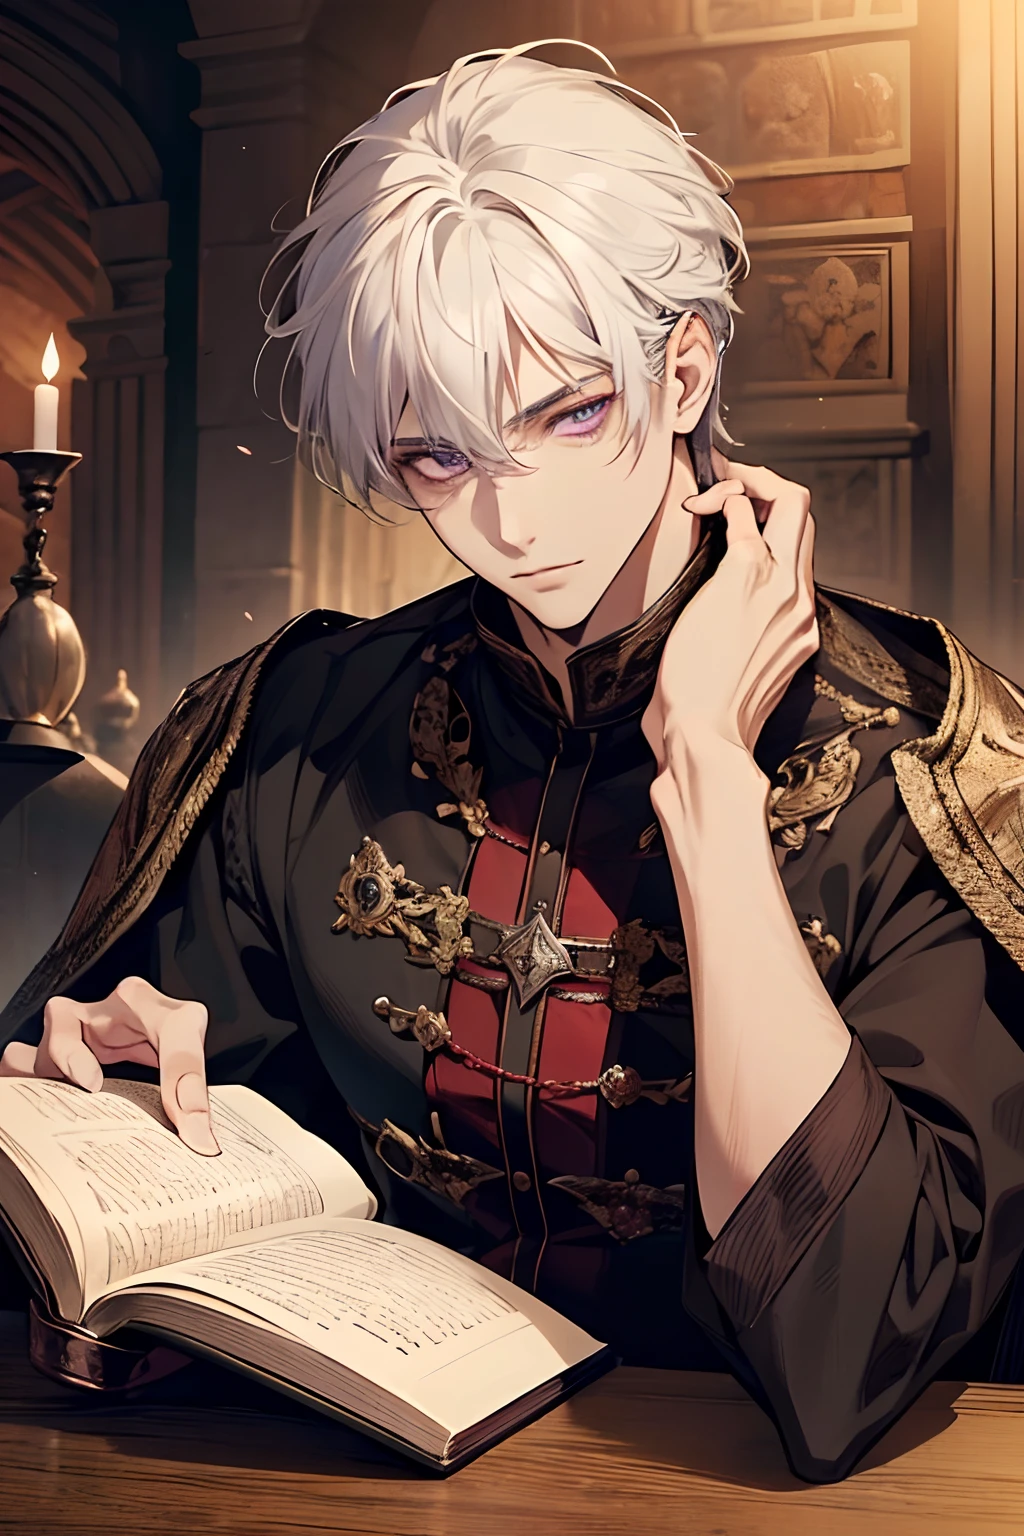 1male, calm, adult, age 35 face, handsome, short messy with bangs, white hair, amethyst colored eyes, royalty, prince, wears black clothing, in a castle, adult face, medieval times, close up, sitting at a table with a book, two hands, adult face, calm